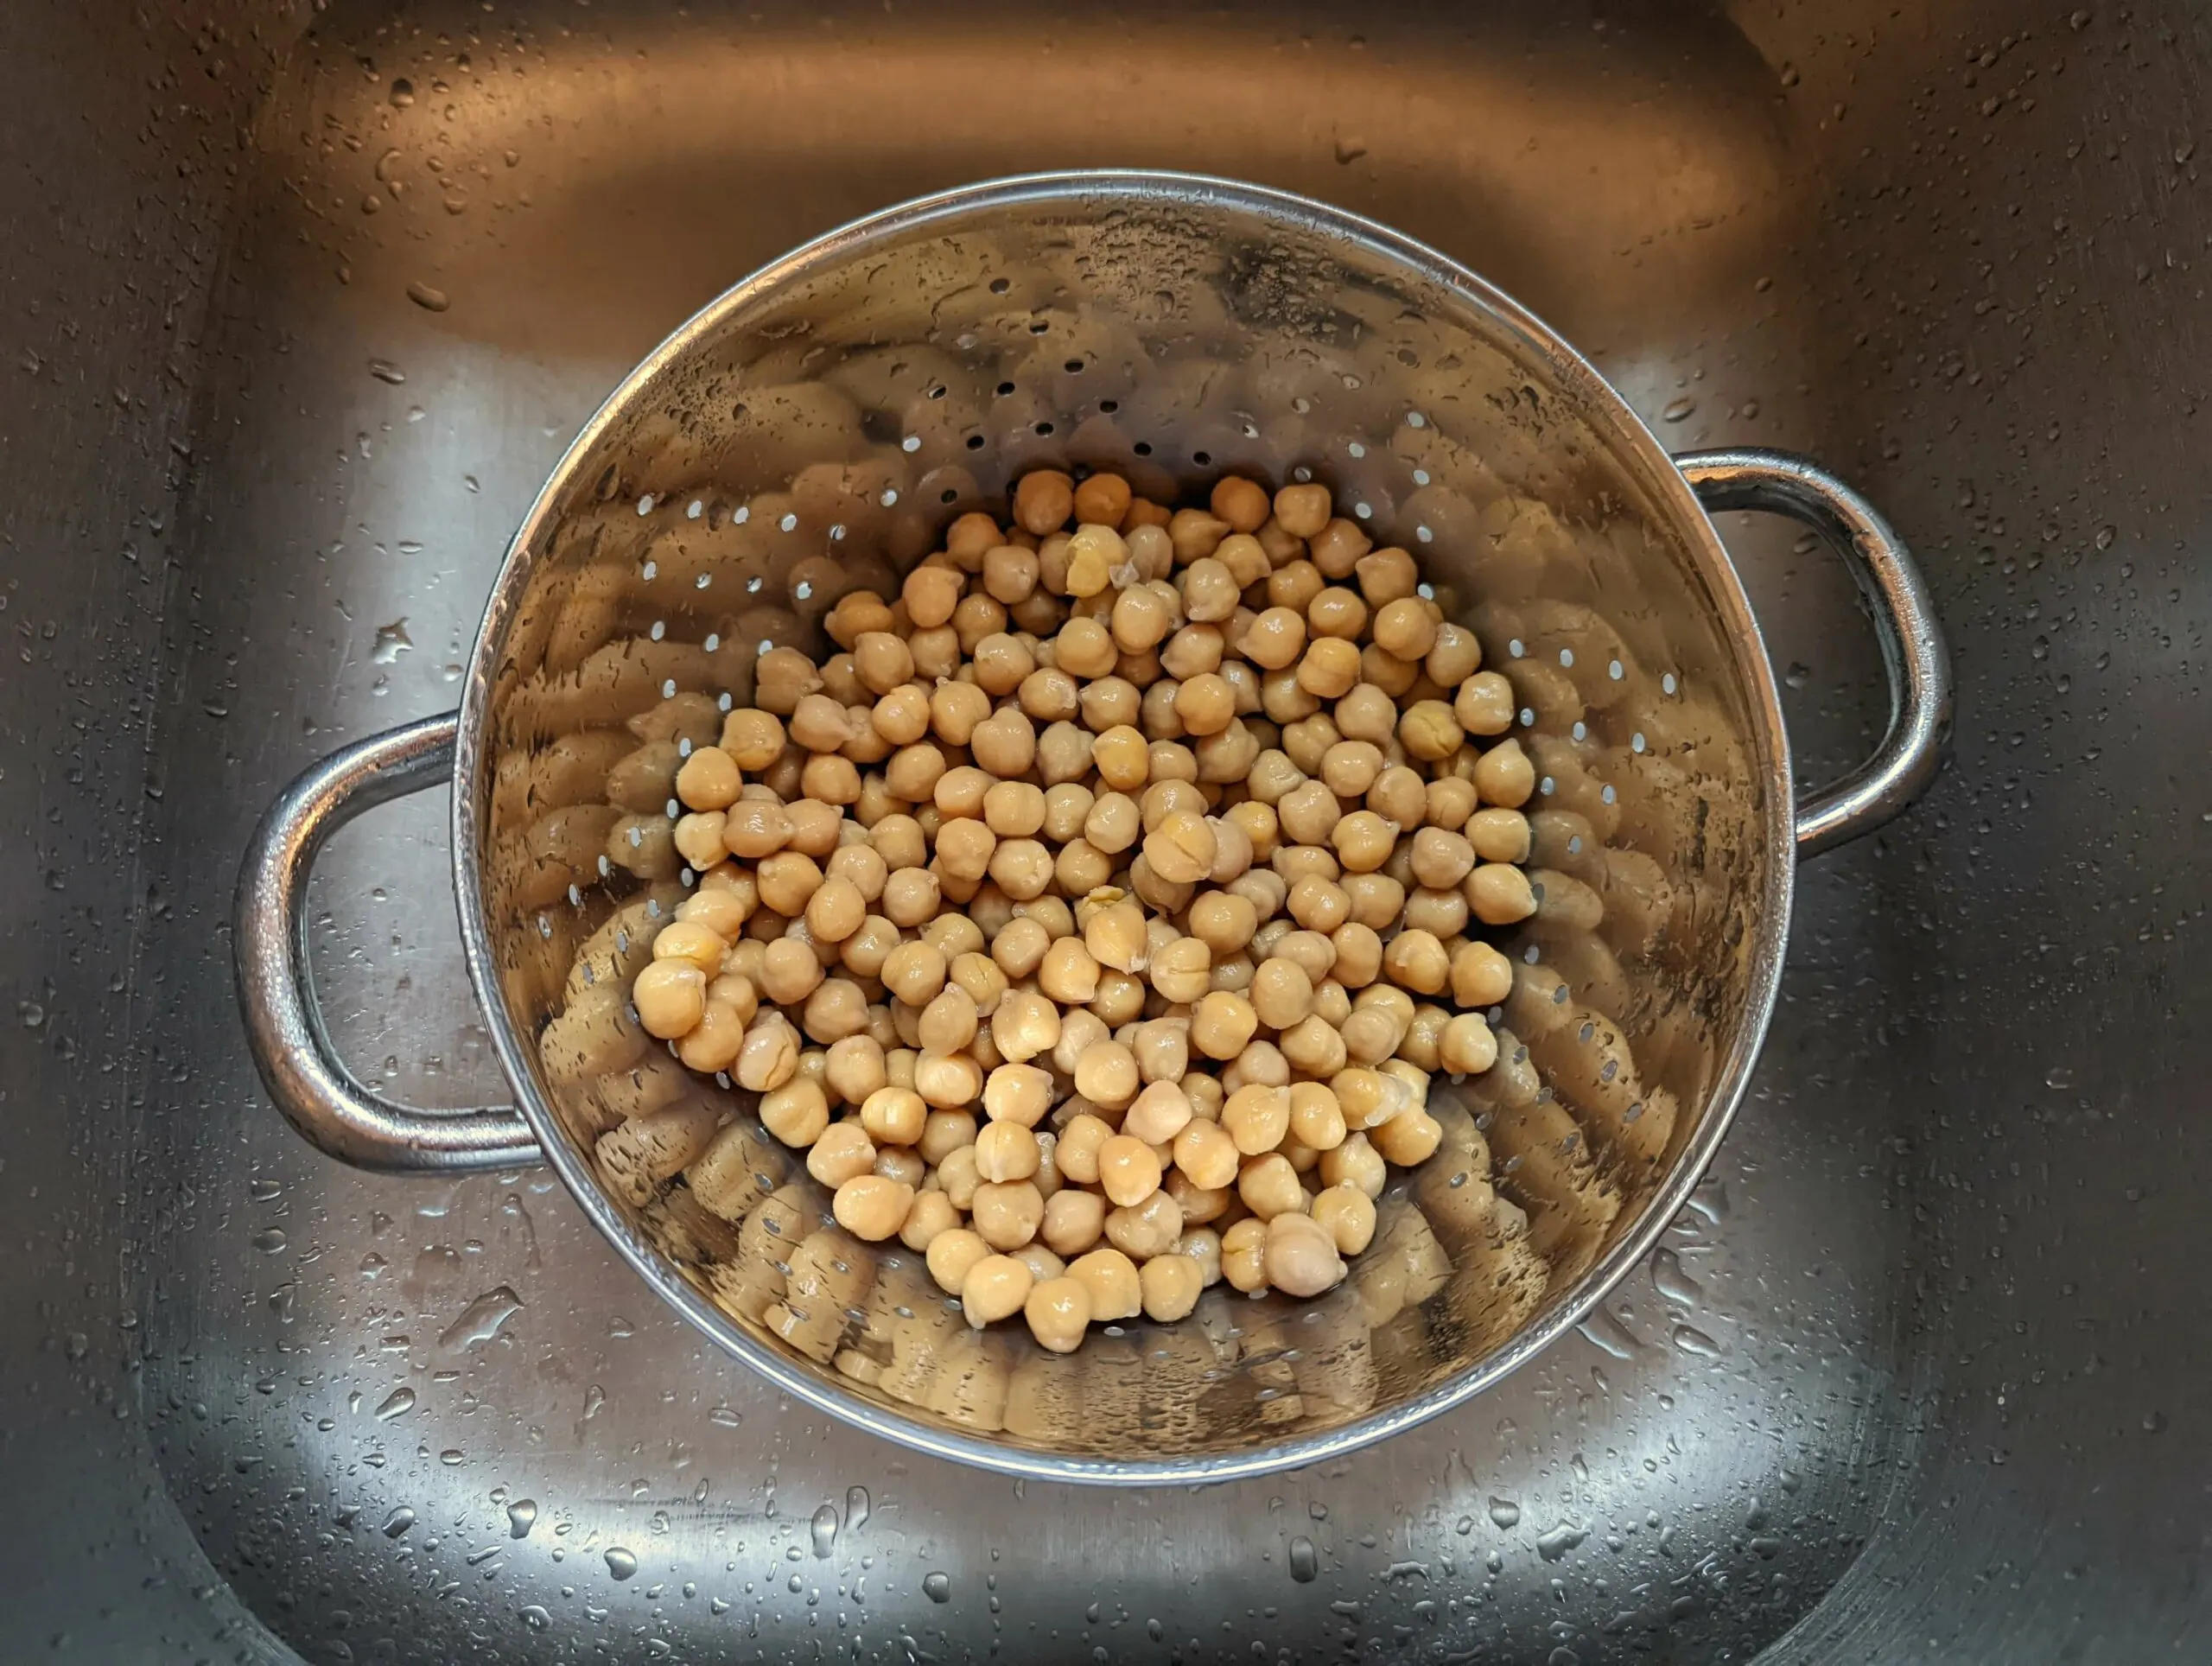 Drain and rinse the chickpeas before using them.